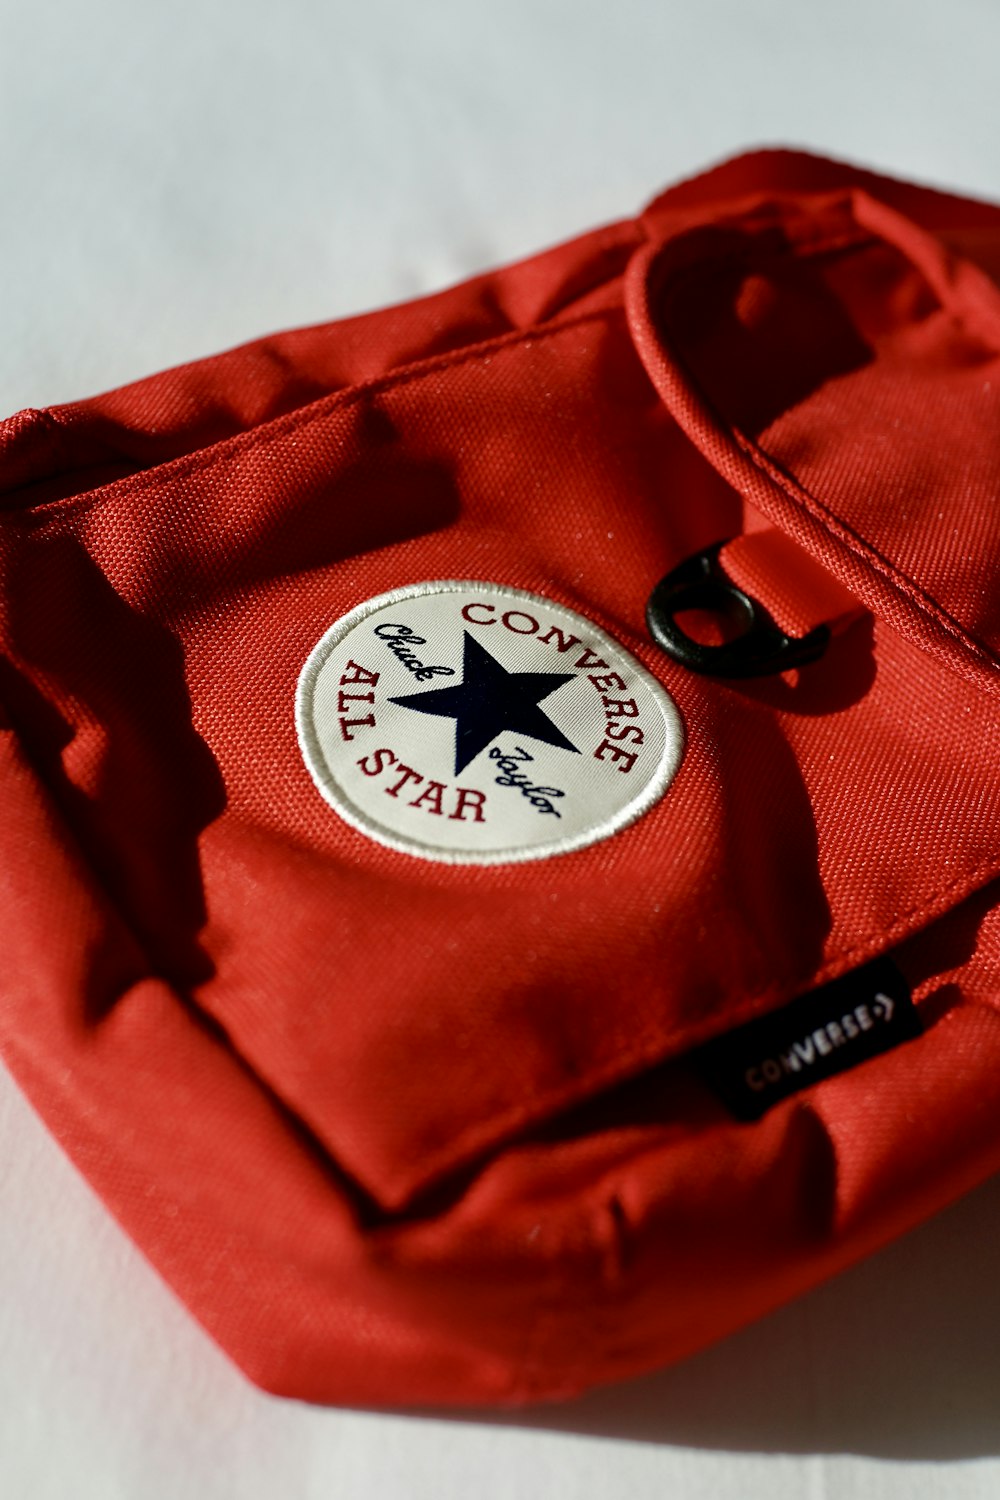 a red bag with a black star on it